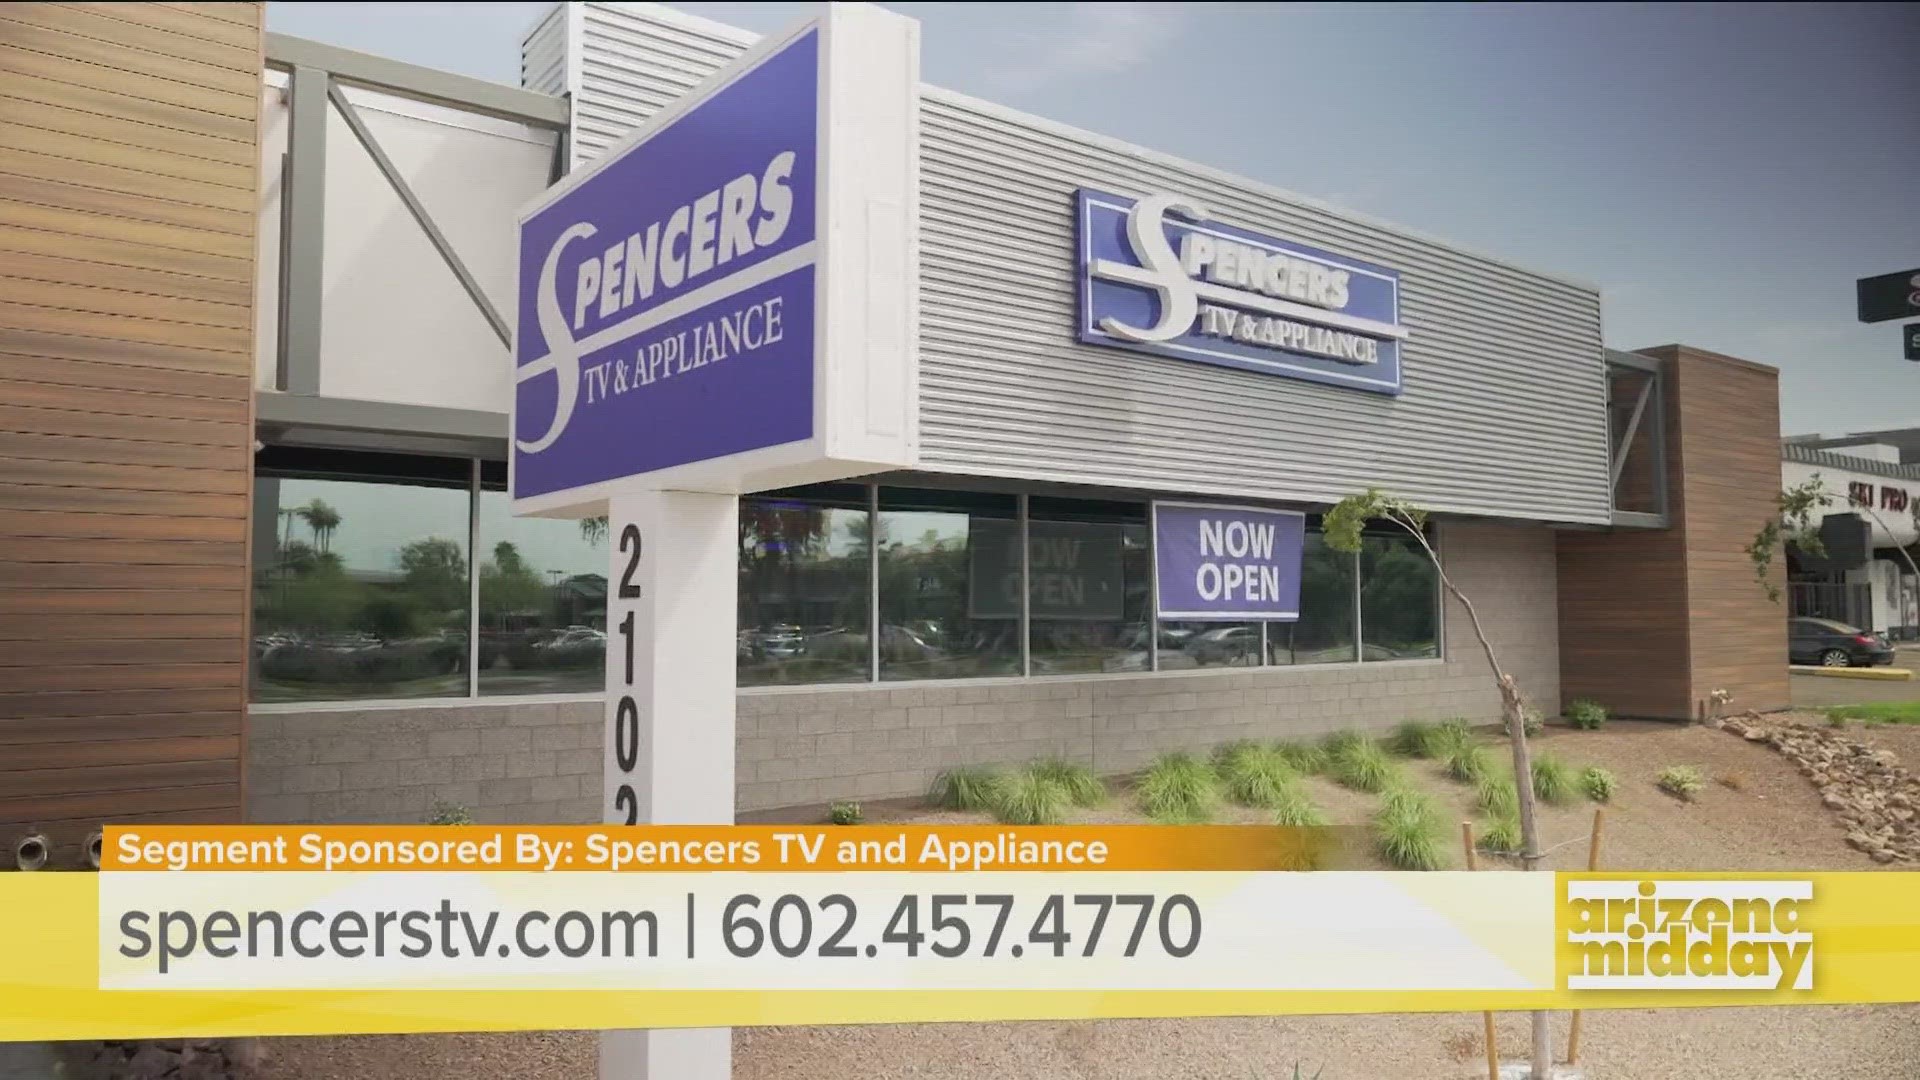 Spencers TV and Appliances is an employee-owned company that has been offering quality deals on TV's, appliances and mattresses for over 50 years.